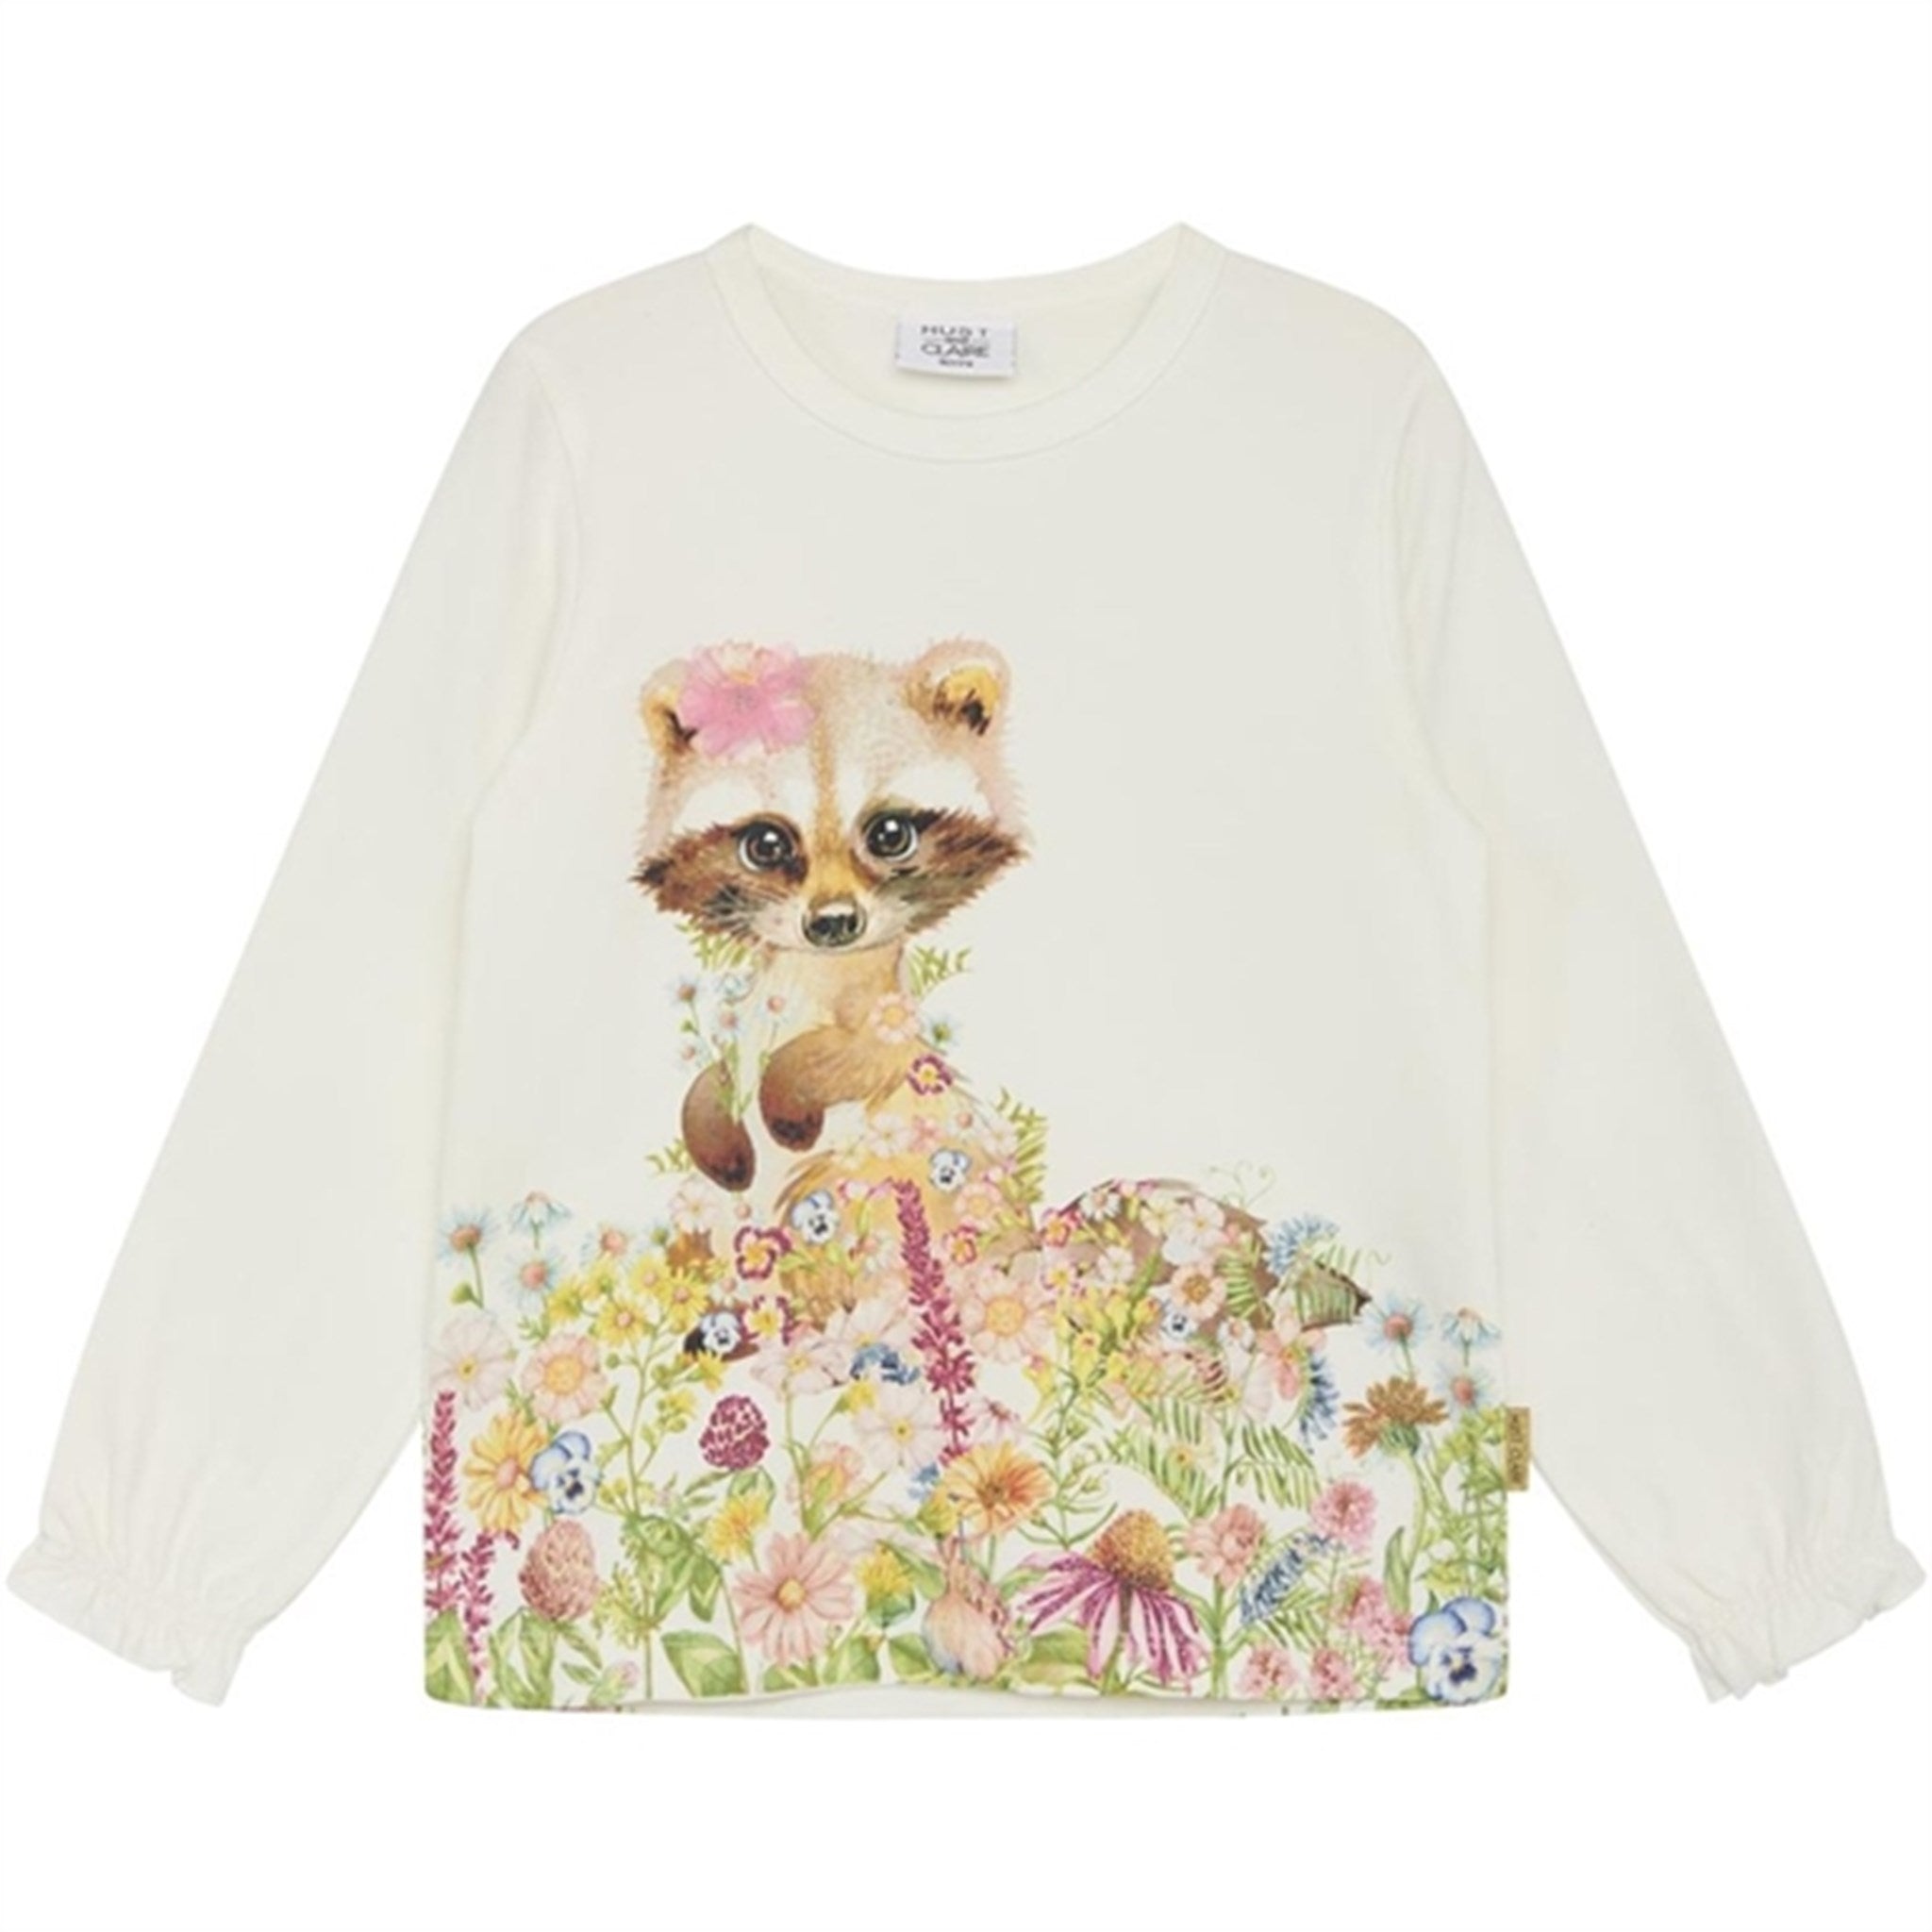 Hust & Claire Ivory Ammy T-Shirt